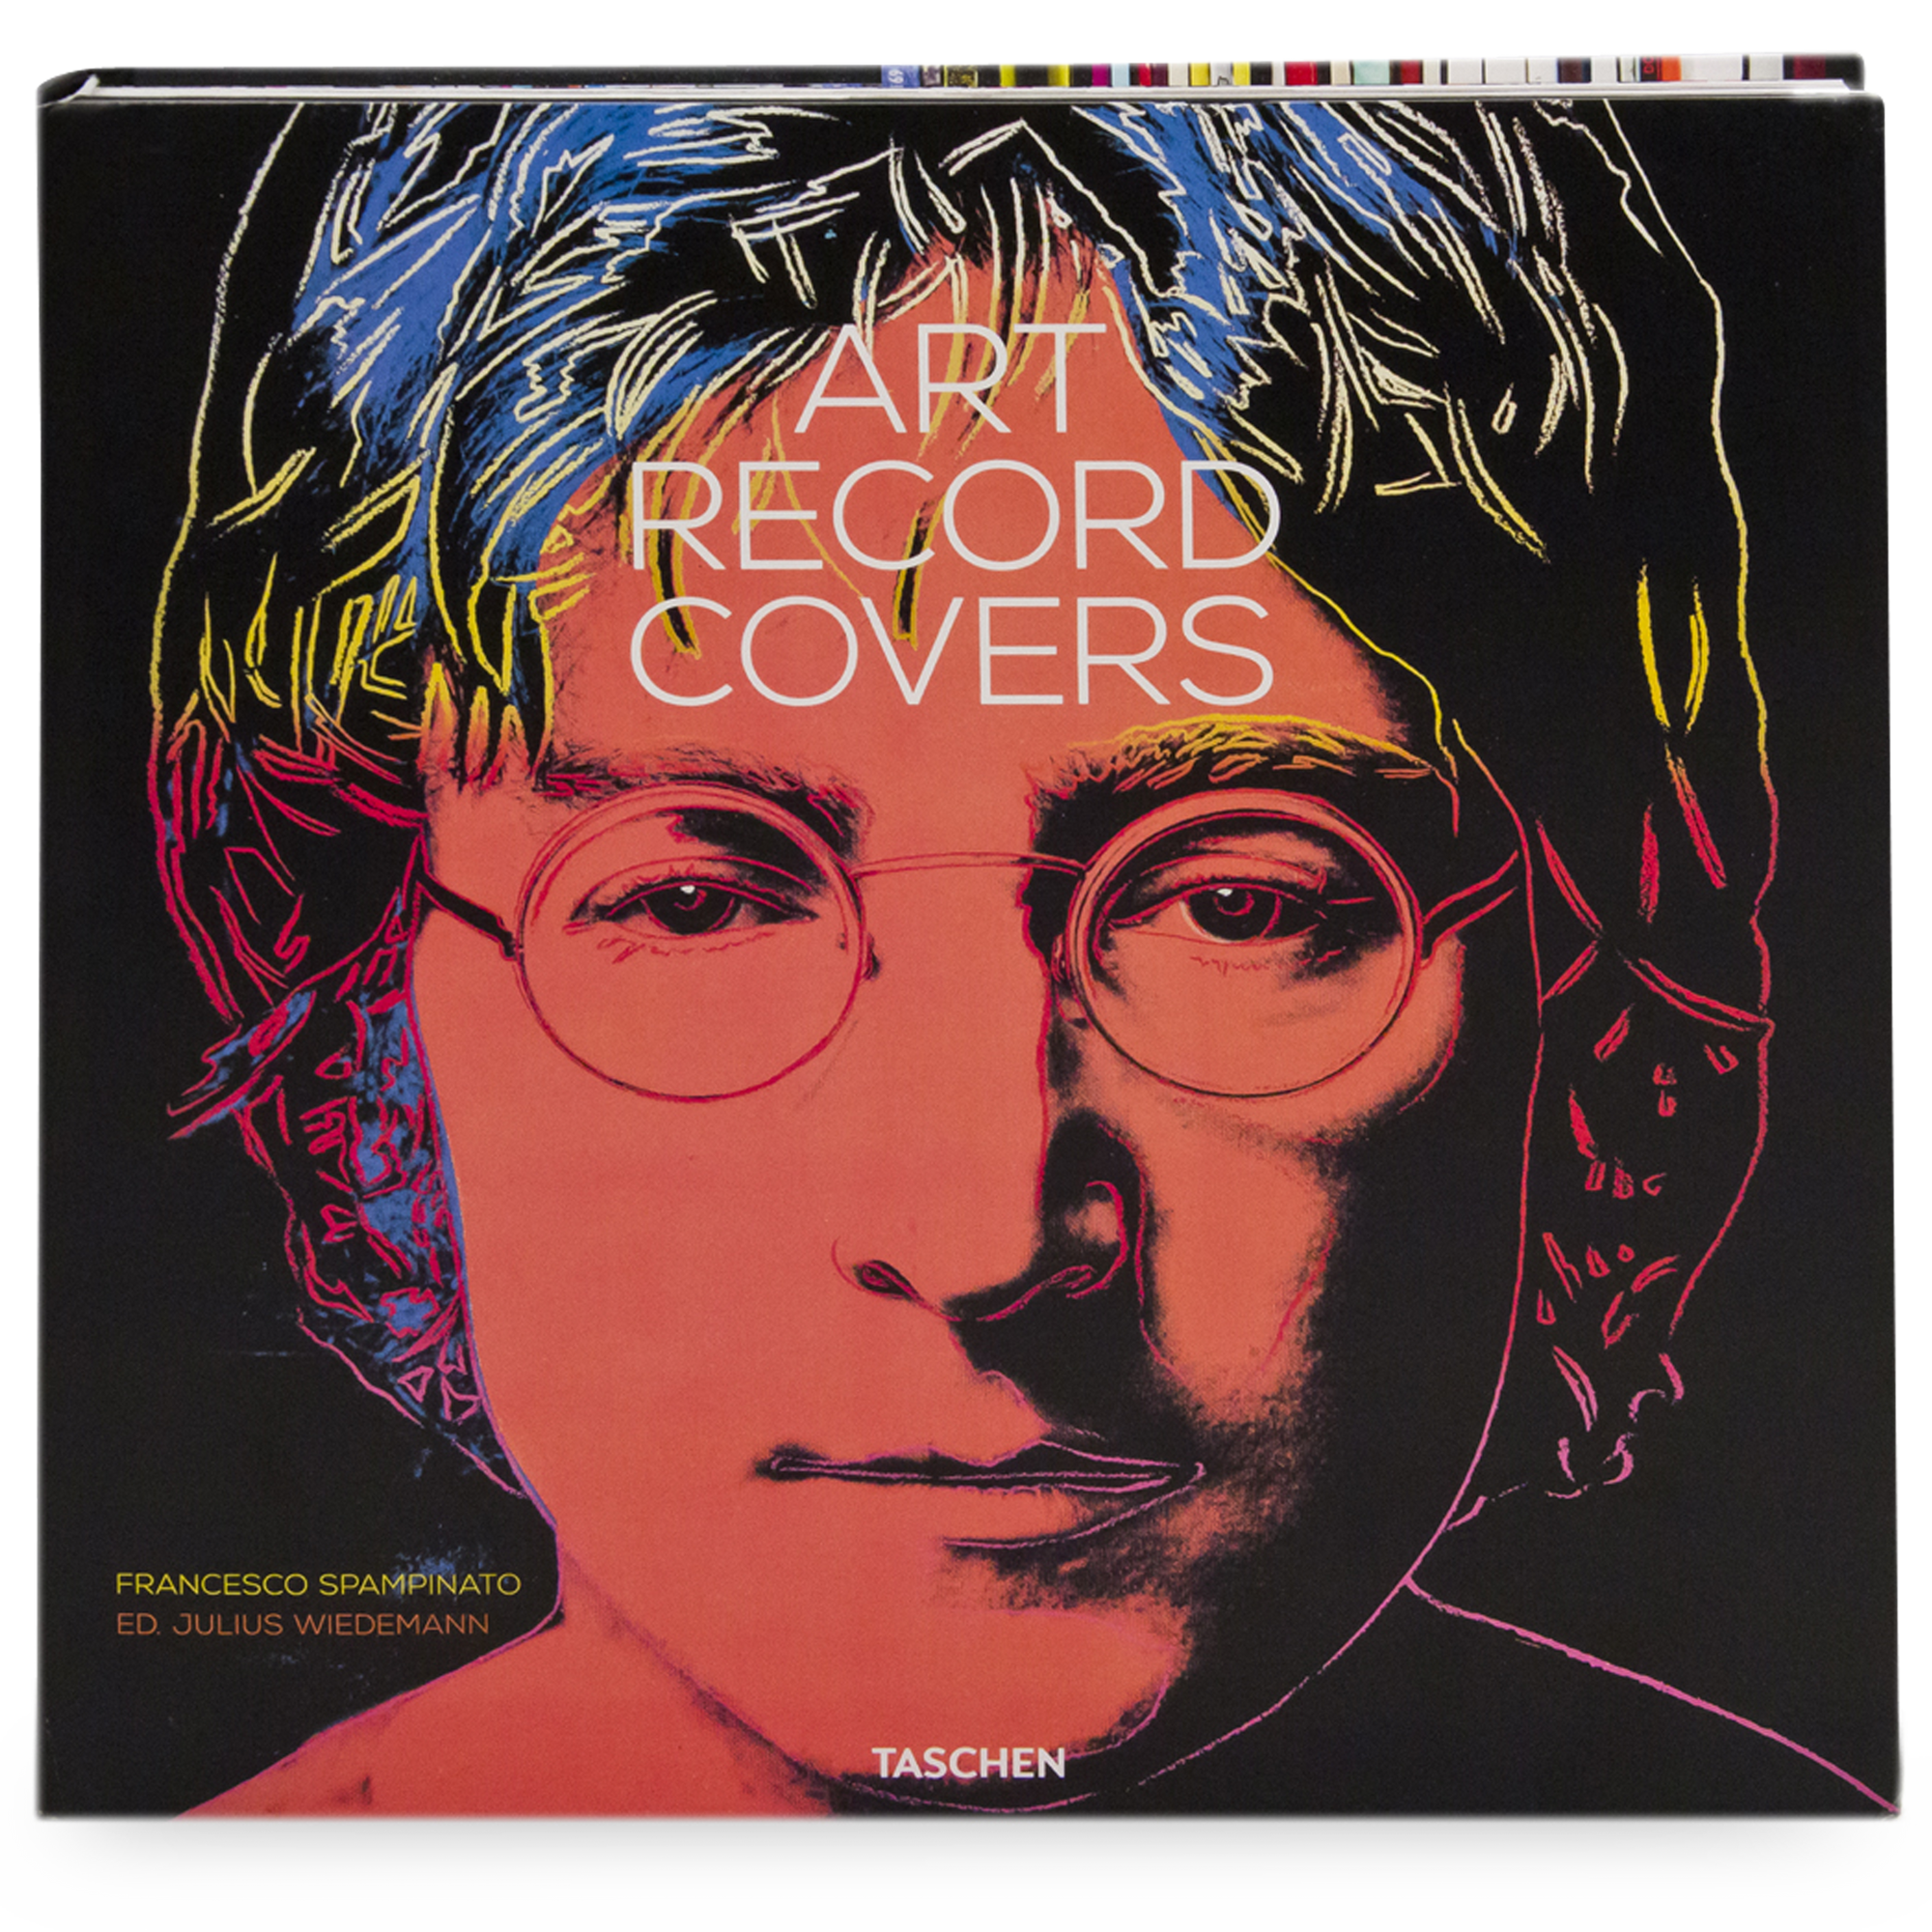 An unprecedented collection of artists' record covers from the 1950s to today.